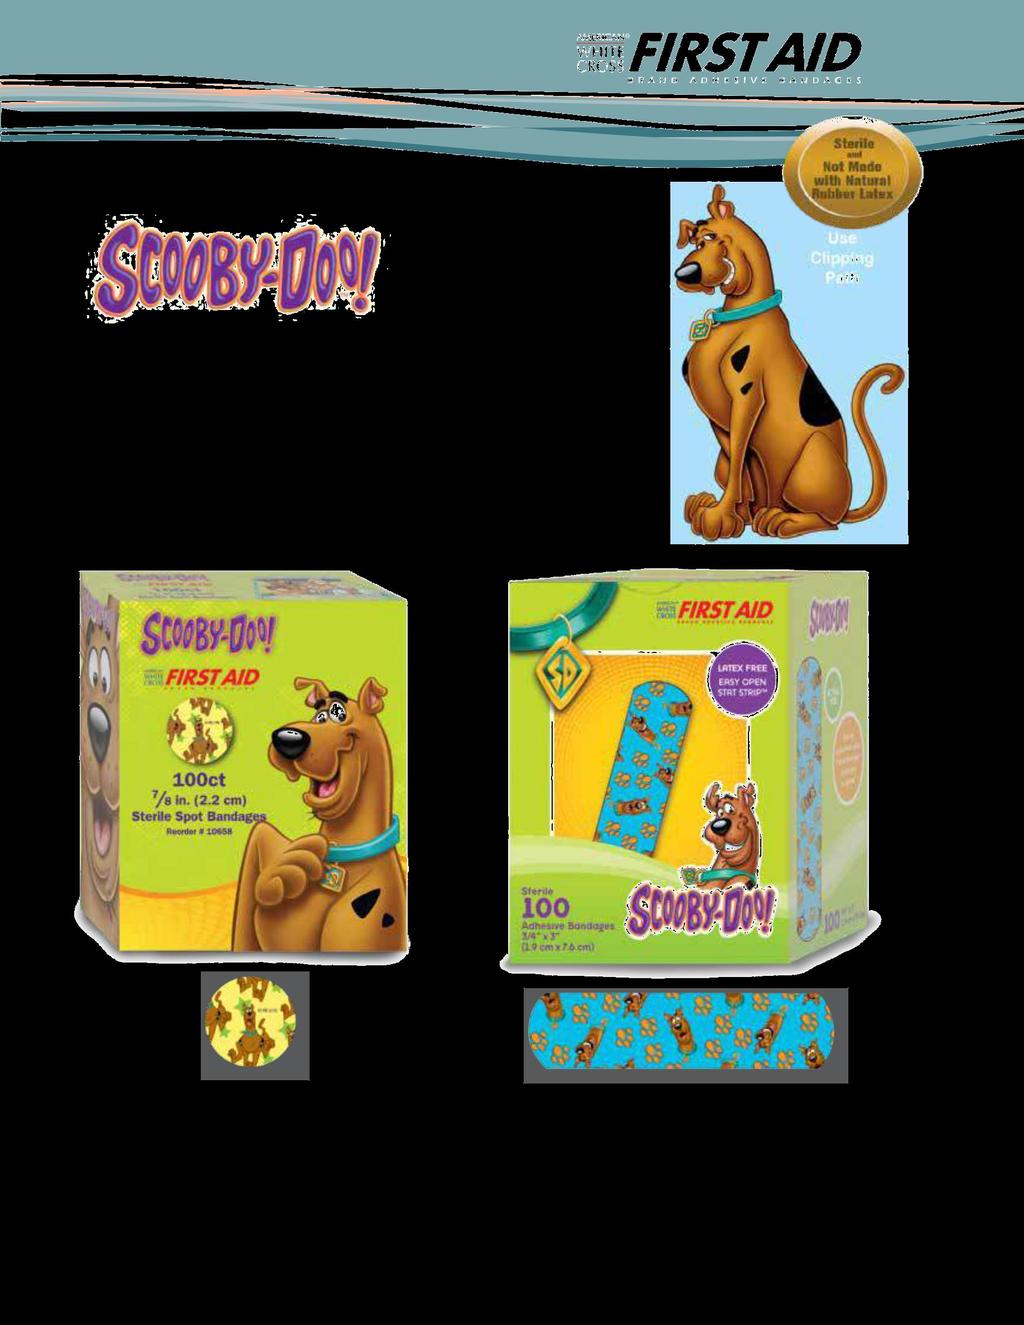 MHMS, INC. Scooby Doo Bandages Scooby Doo is a fun character long loved by kids of all ages.